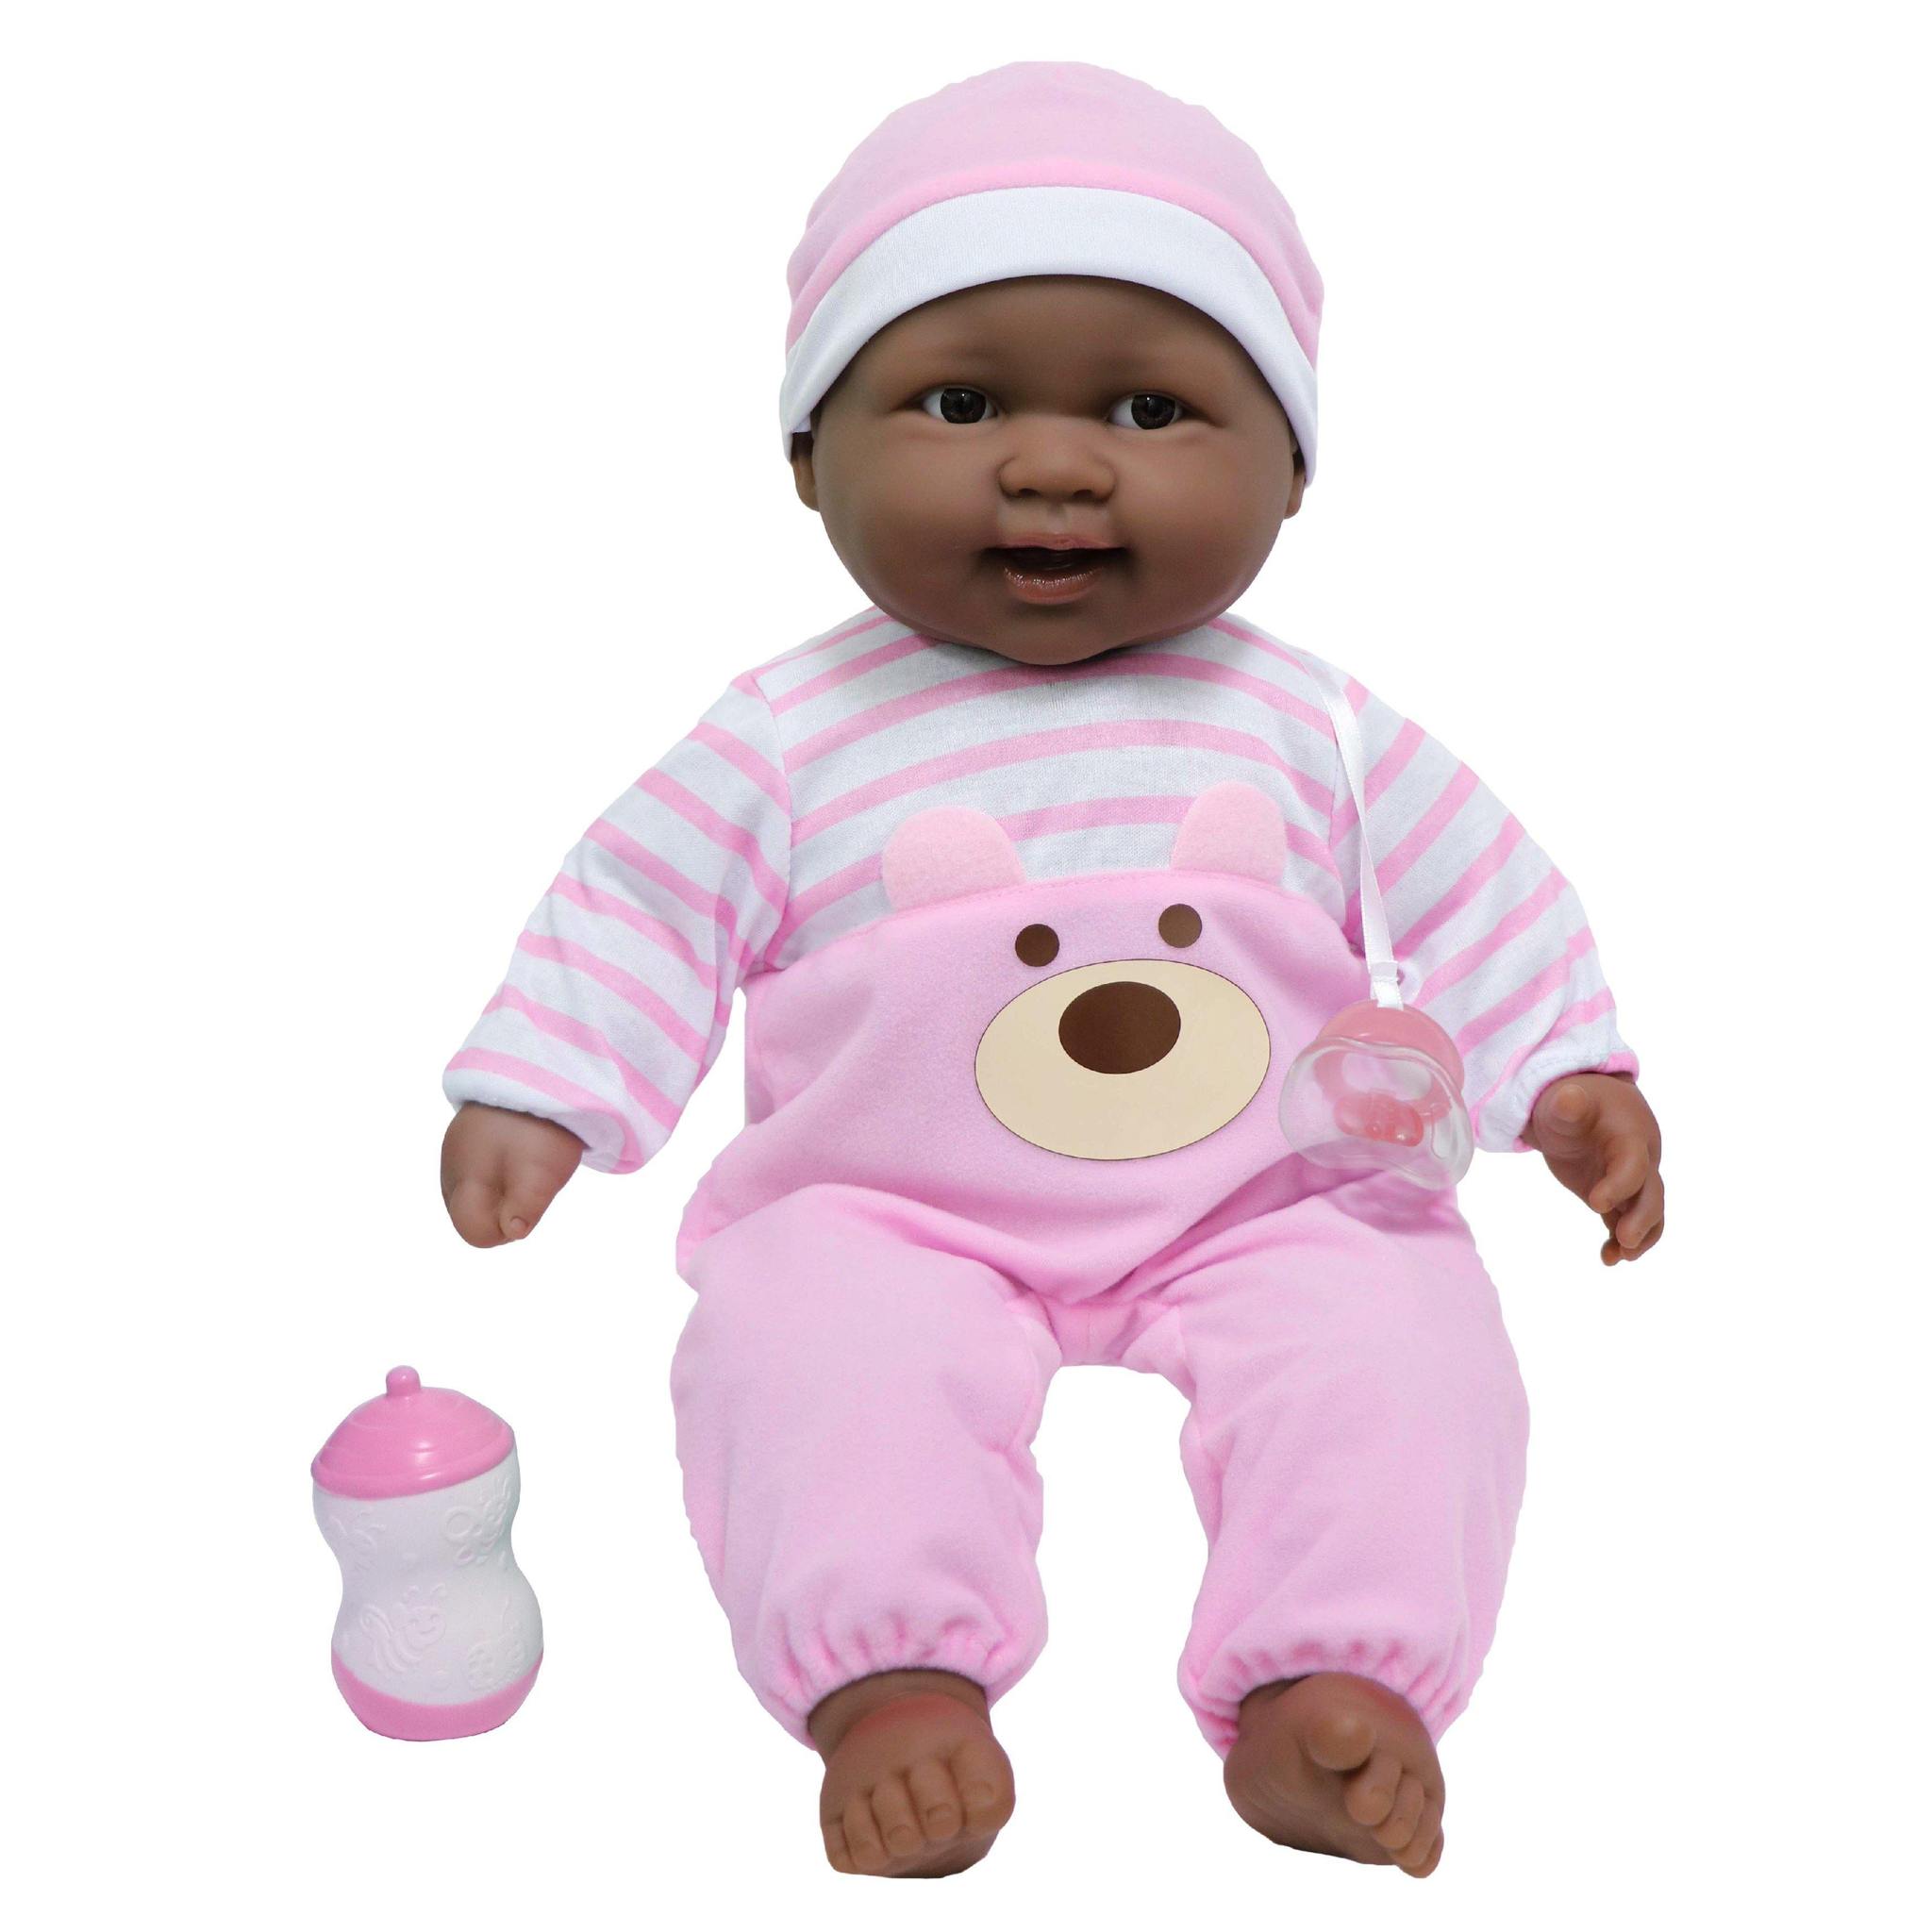 Lots to Cuddle Babies African American Soft Body Baby Doll  Pink - 20 in -  Snag-It, SN2563841